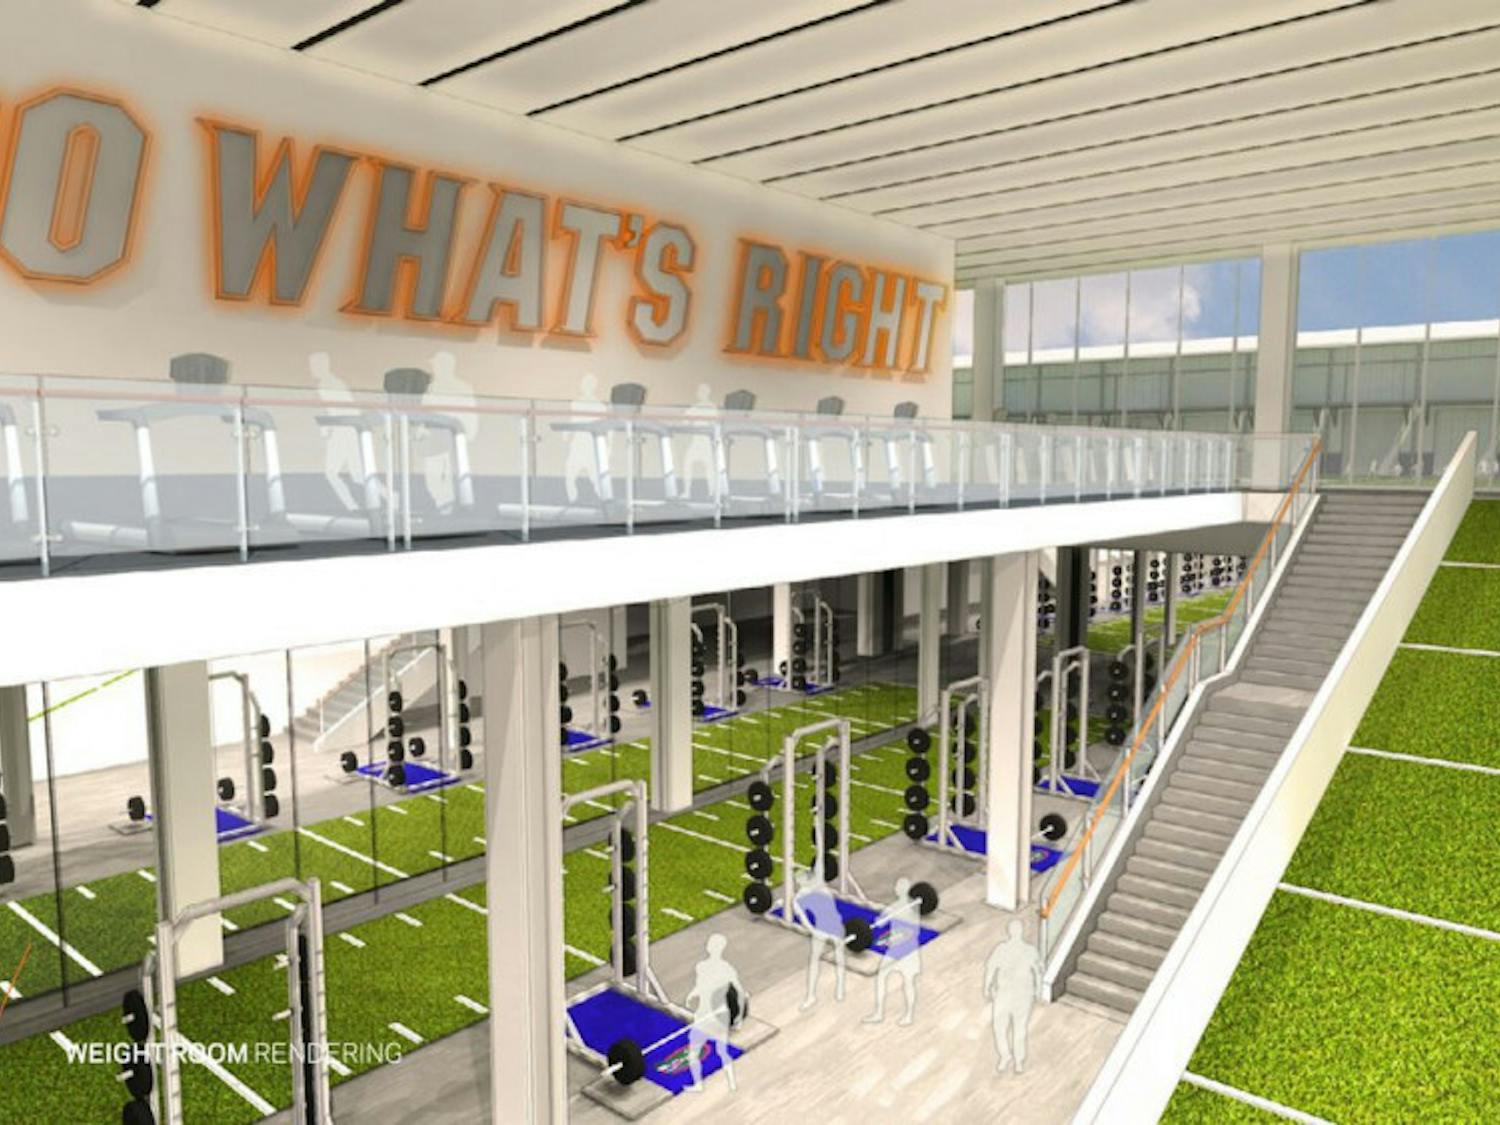 A rendering of Florida's plan for a new stand-alone football facility.